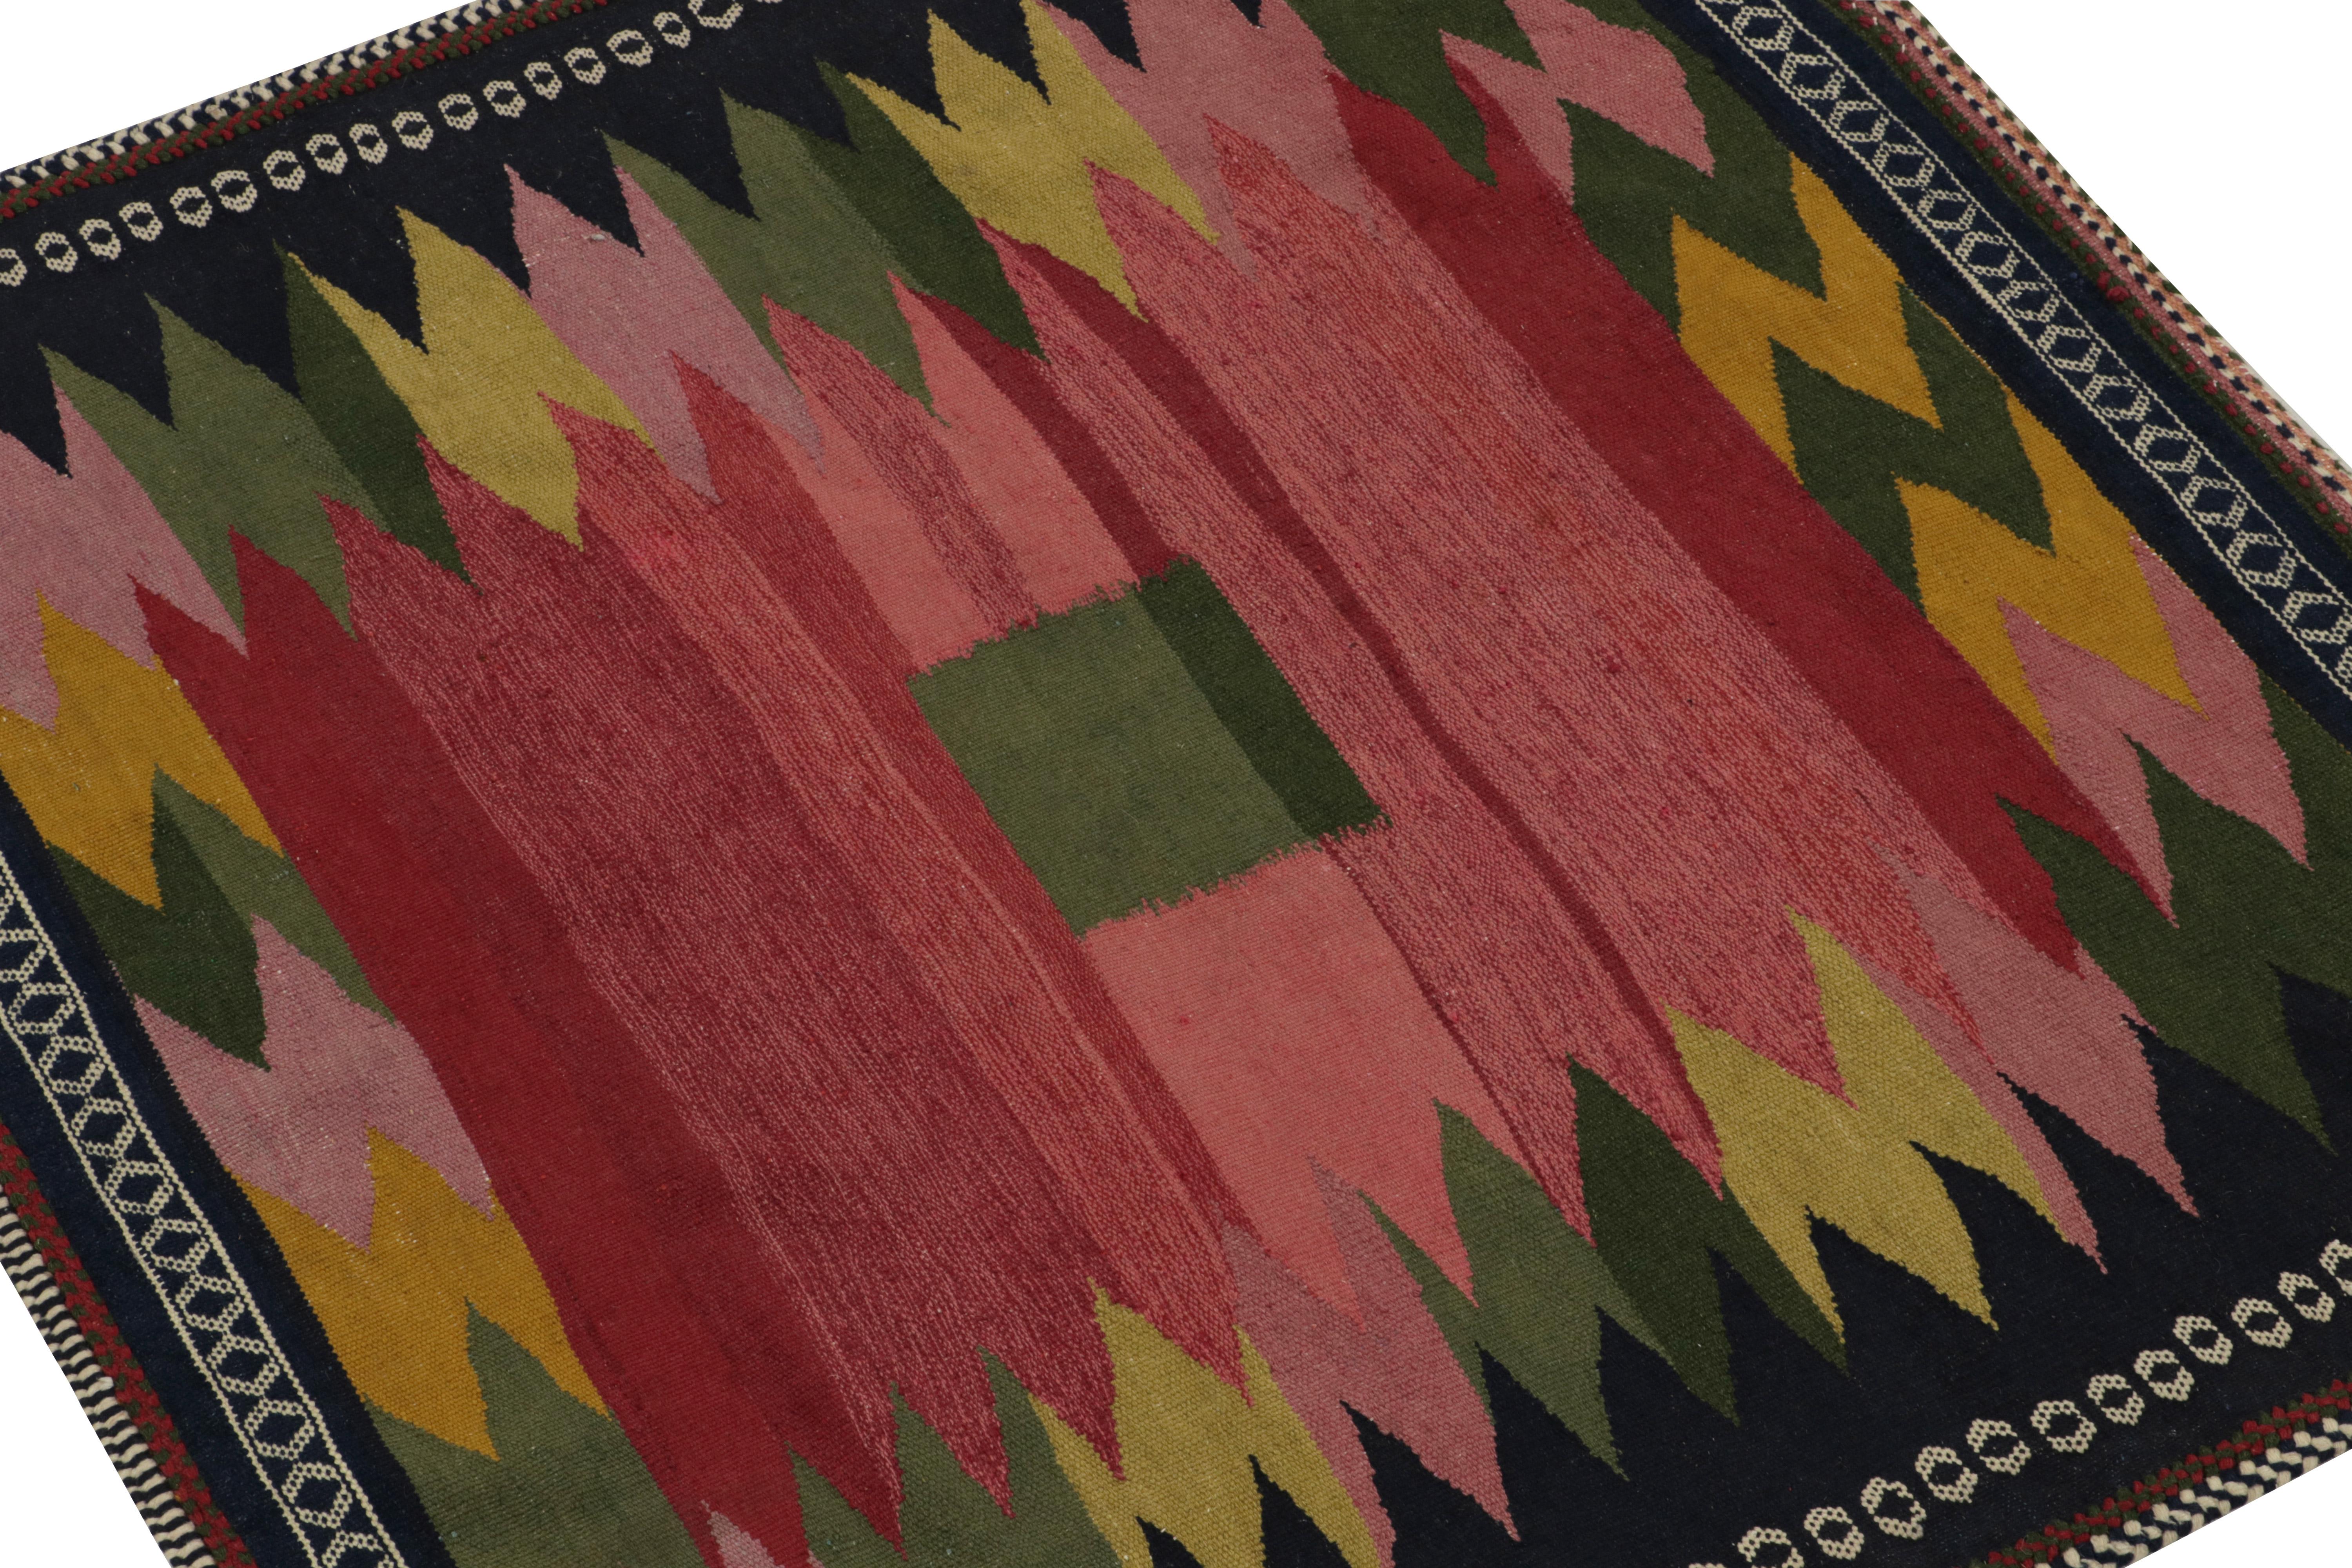 Persian 1980s Vintage Sofreh Kilim Rug in Pink & Green Medallion Pattern by Rug & Kilim For Sale